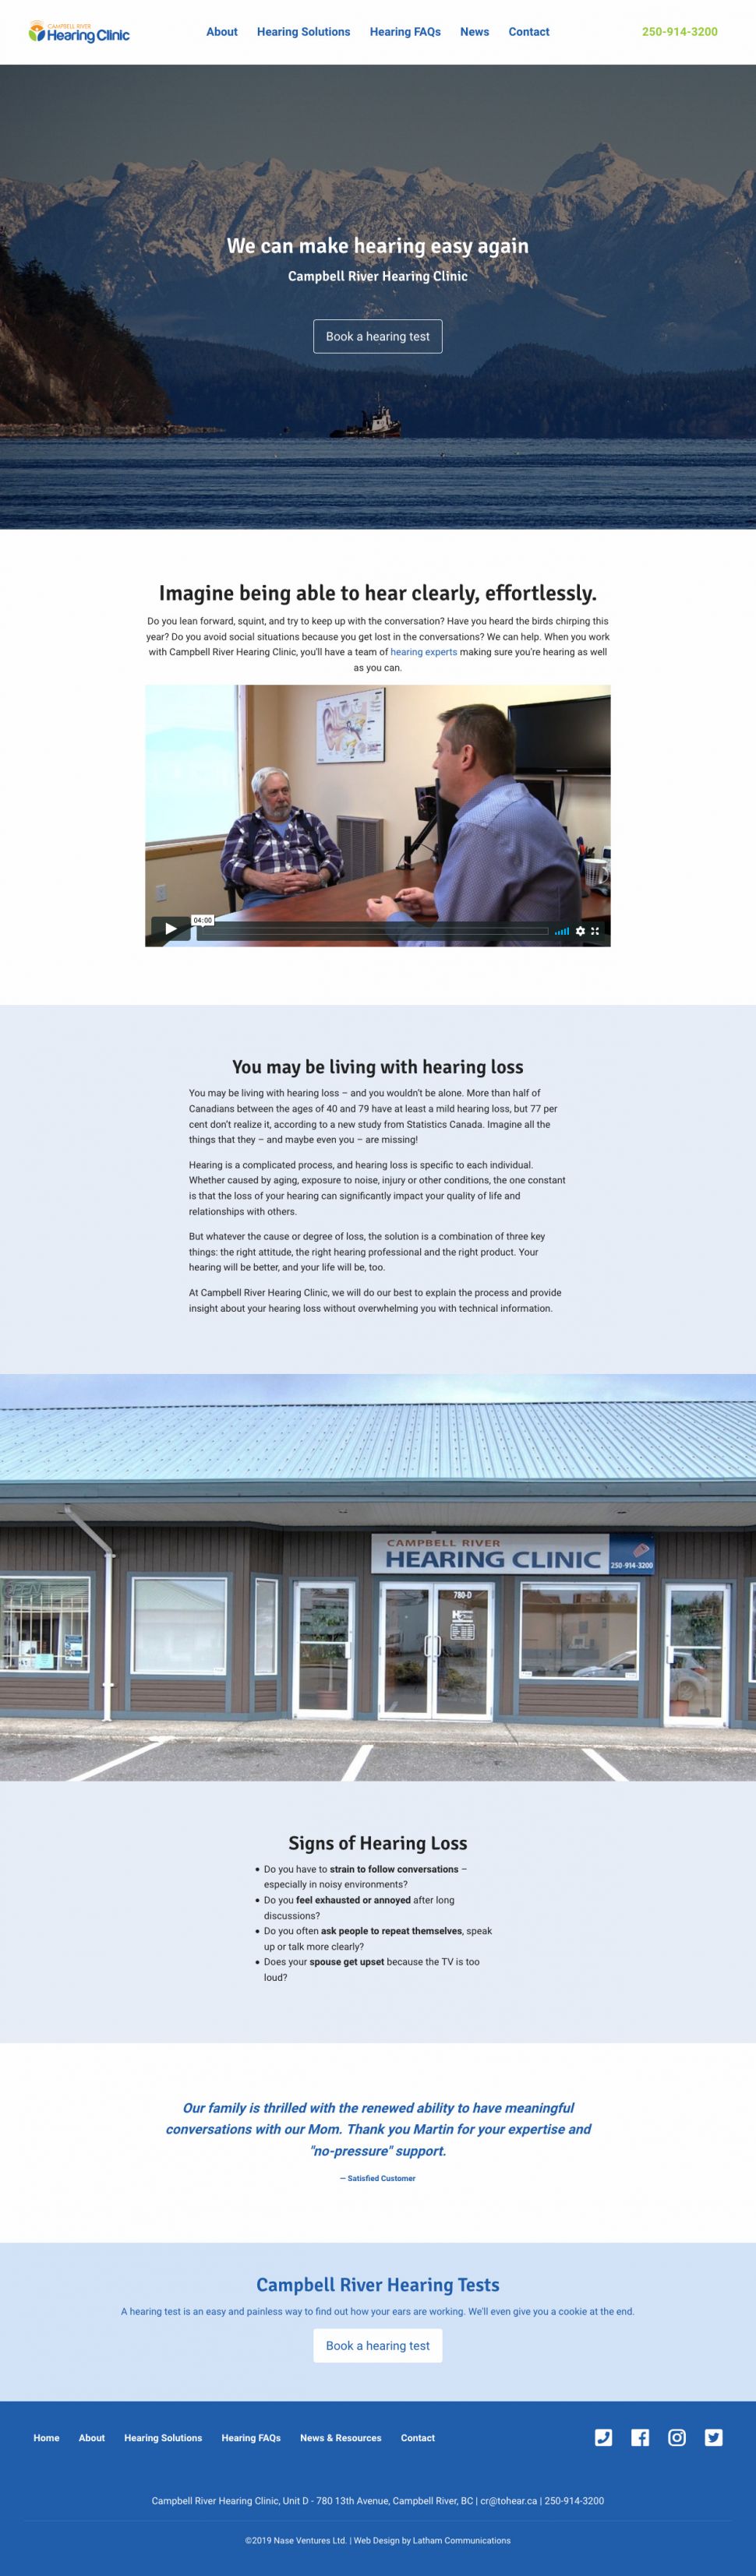 Screenshot of Campbell River Hearing Clinic website home page.